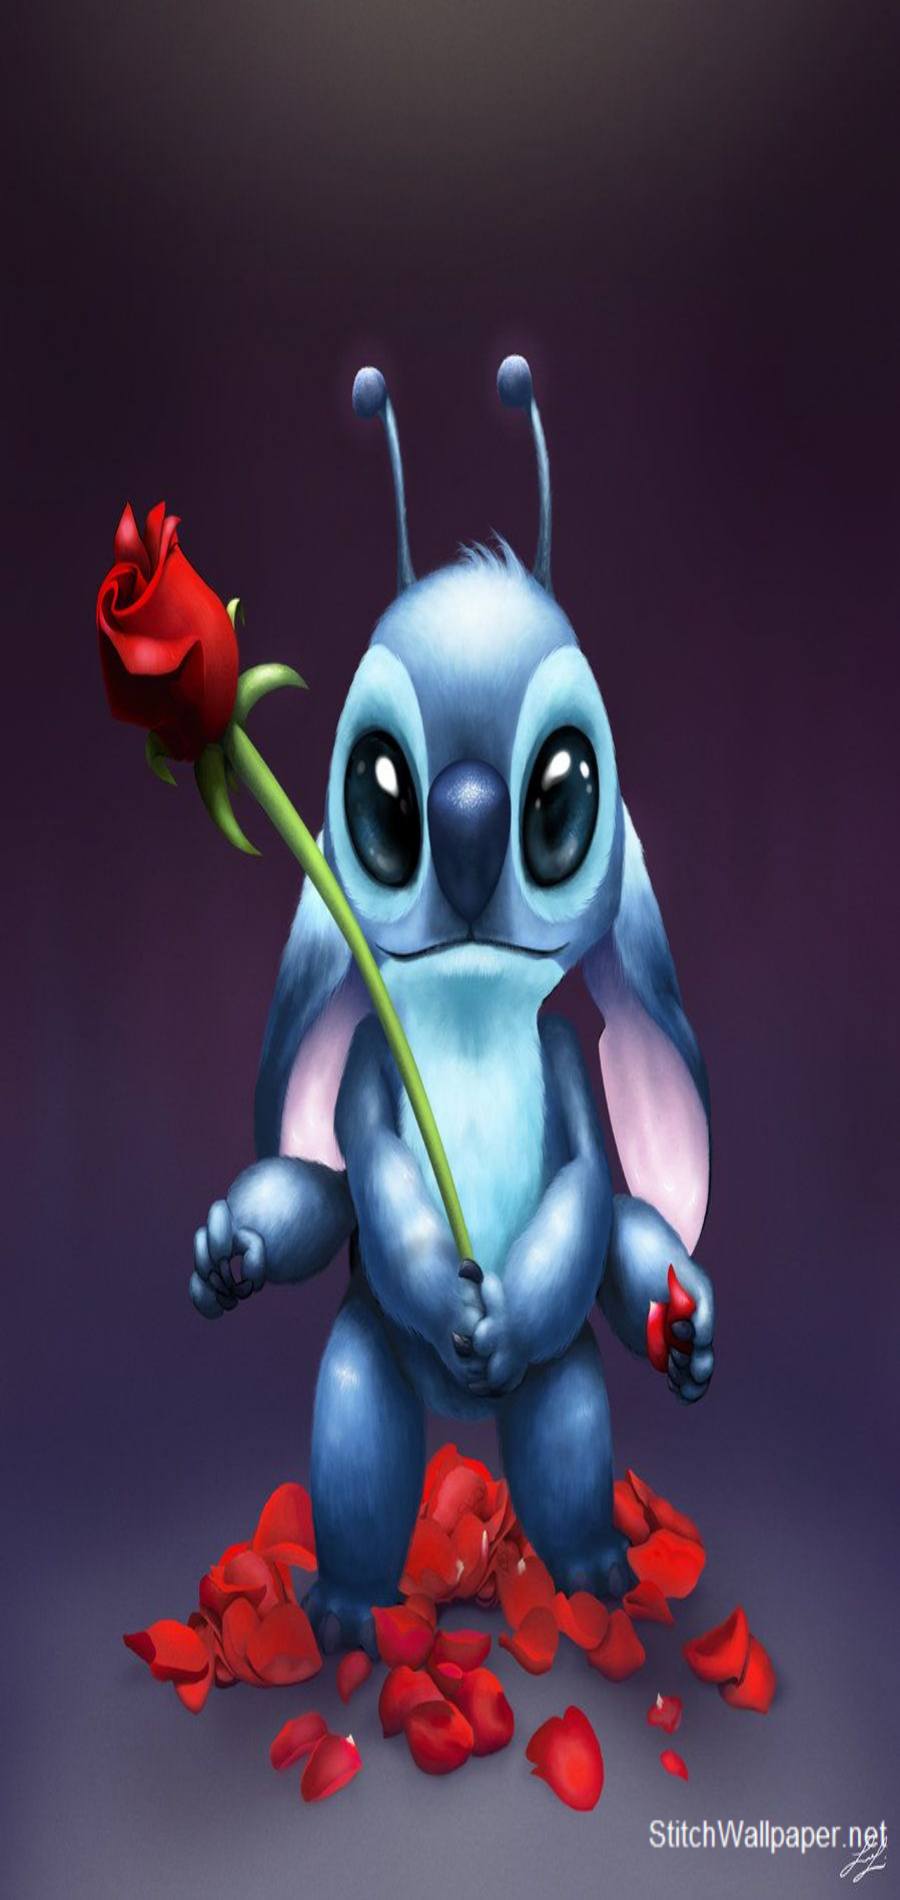 stitch wallpaper with rose
